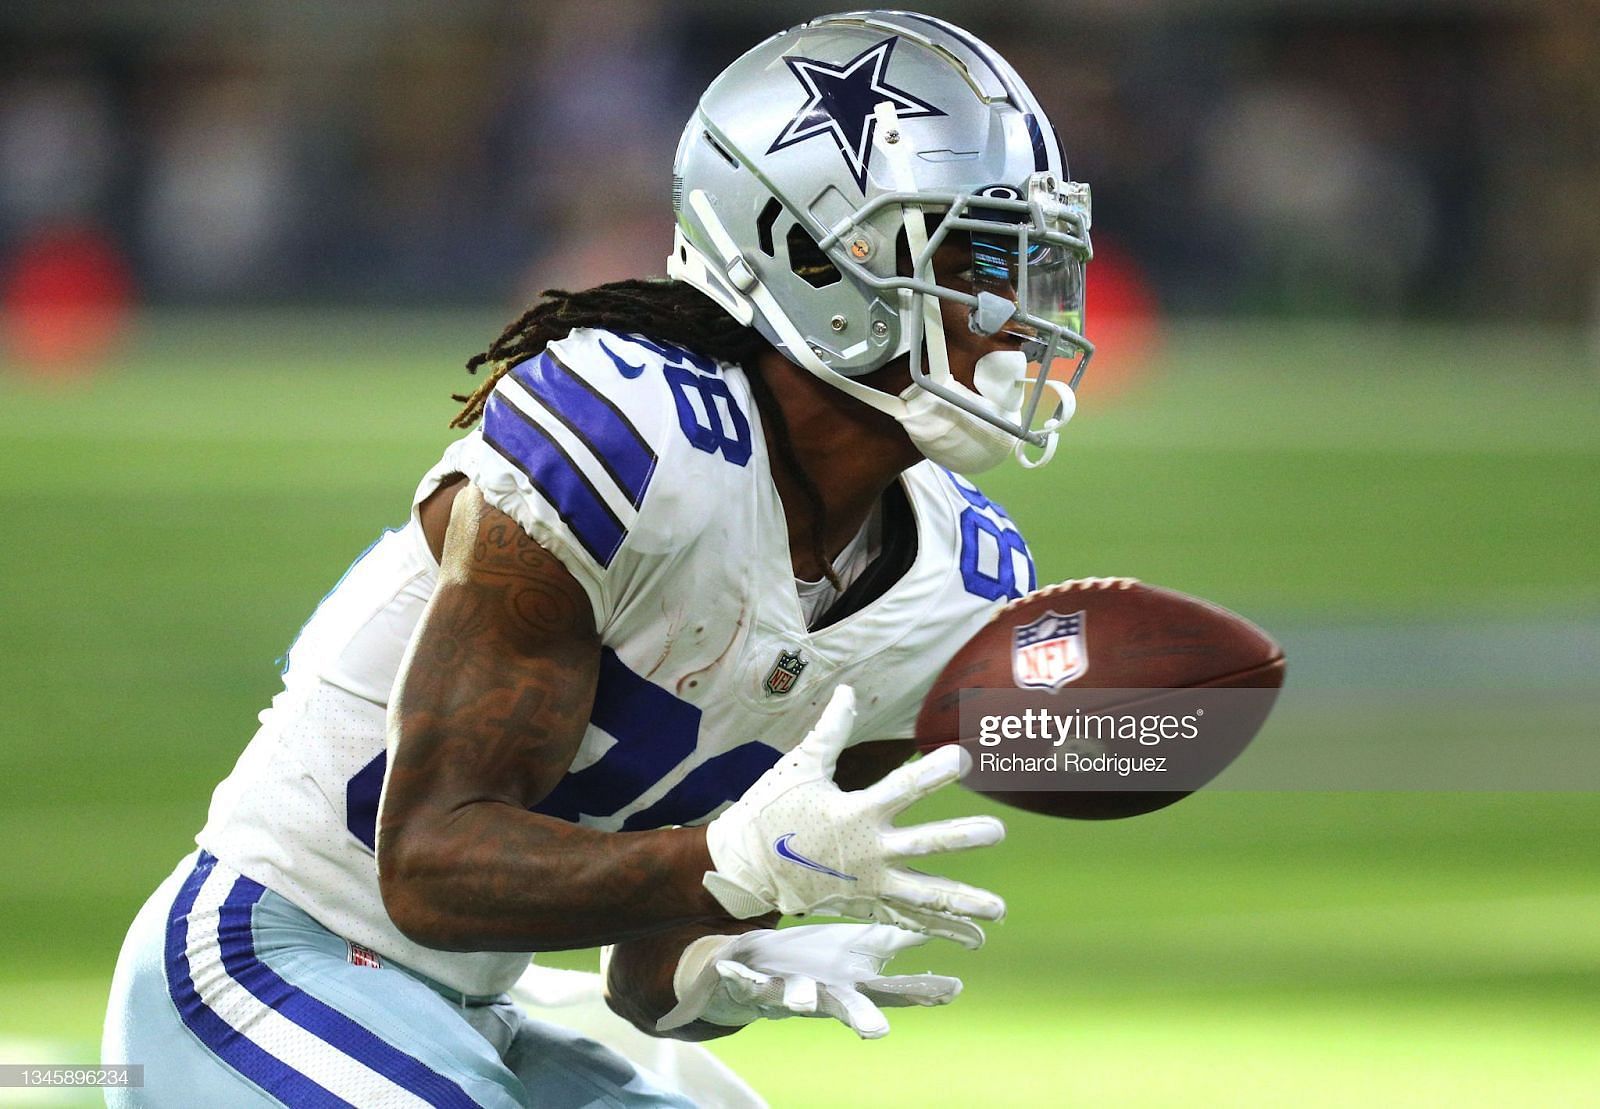 NFL Draft results 2020: The Dallas Cowboys select CeeDee Lamb with